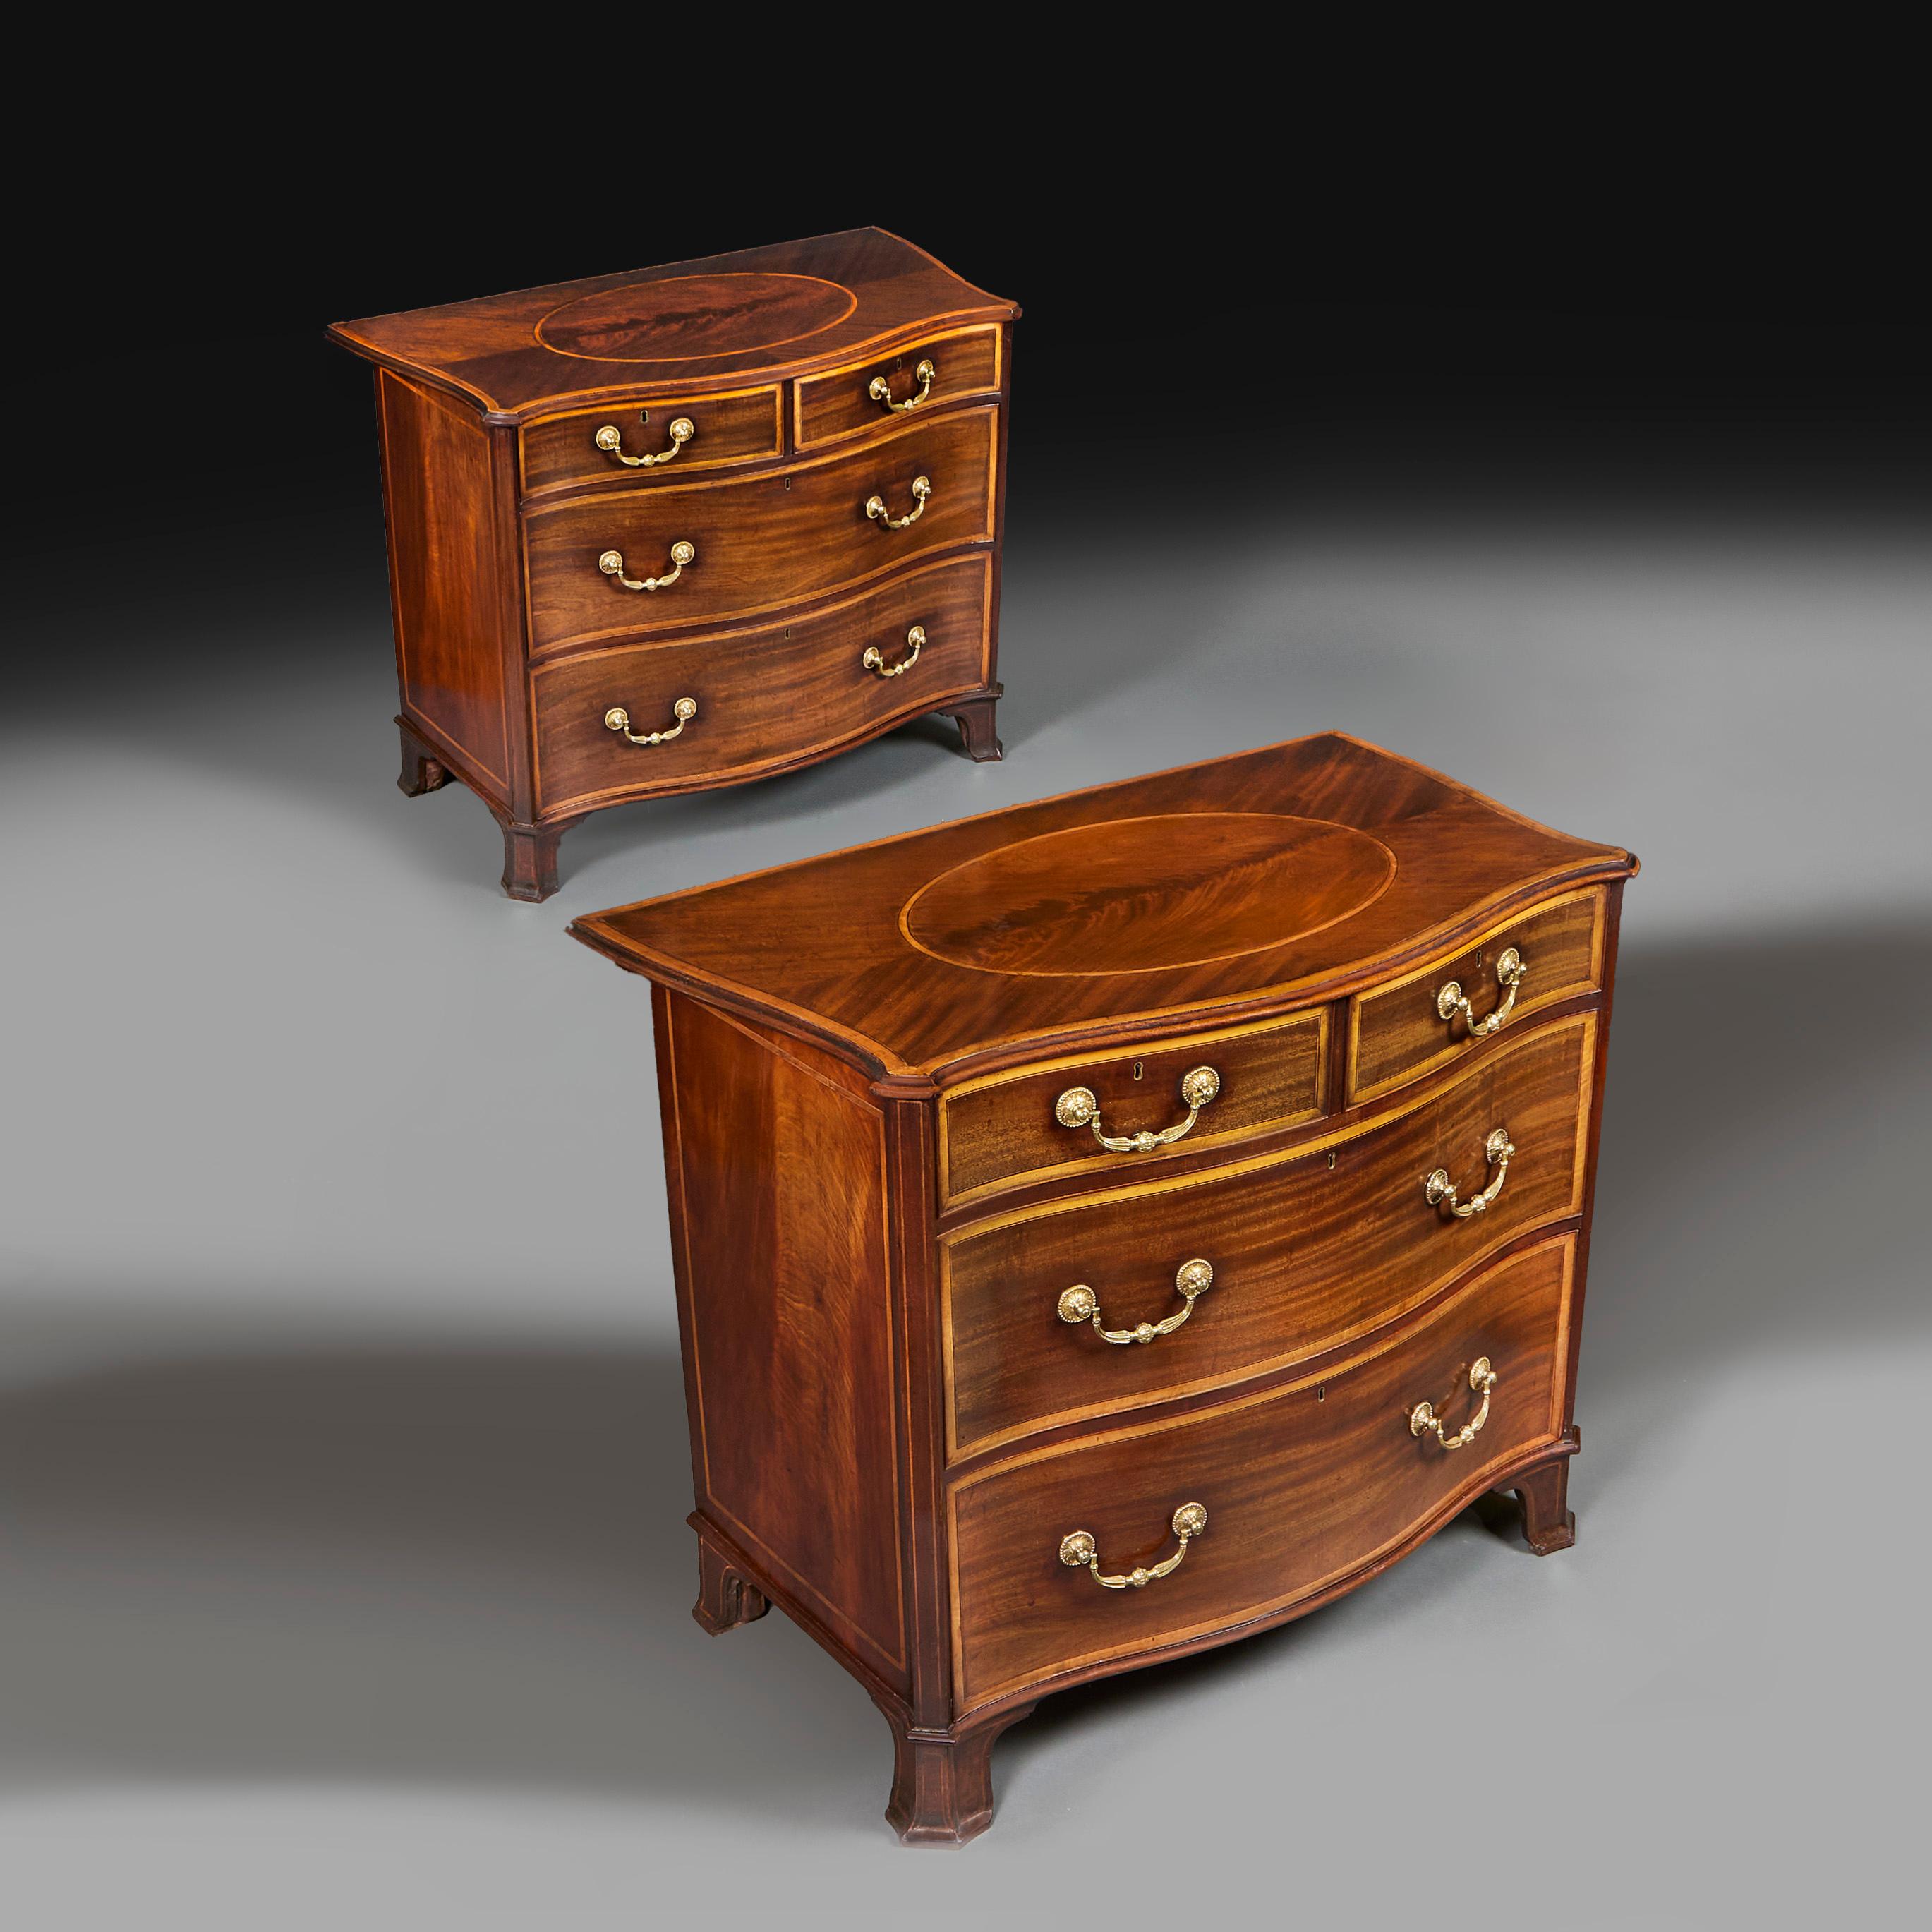 England, circa 1790

A fine pair of late eighteenth century mahogany serpentine commodes, the tops with satinwood crossbanding, each with a central oval medallion of fine mahogany flame veneer. With graduated drawers, two short drawers above two